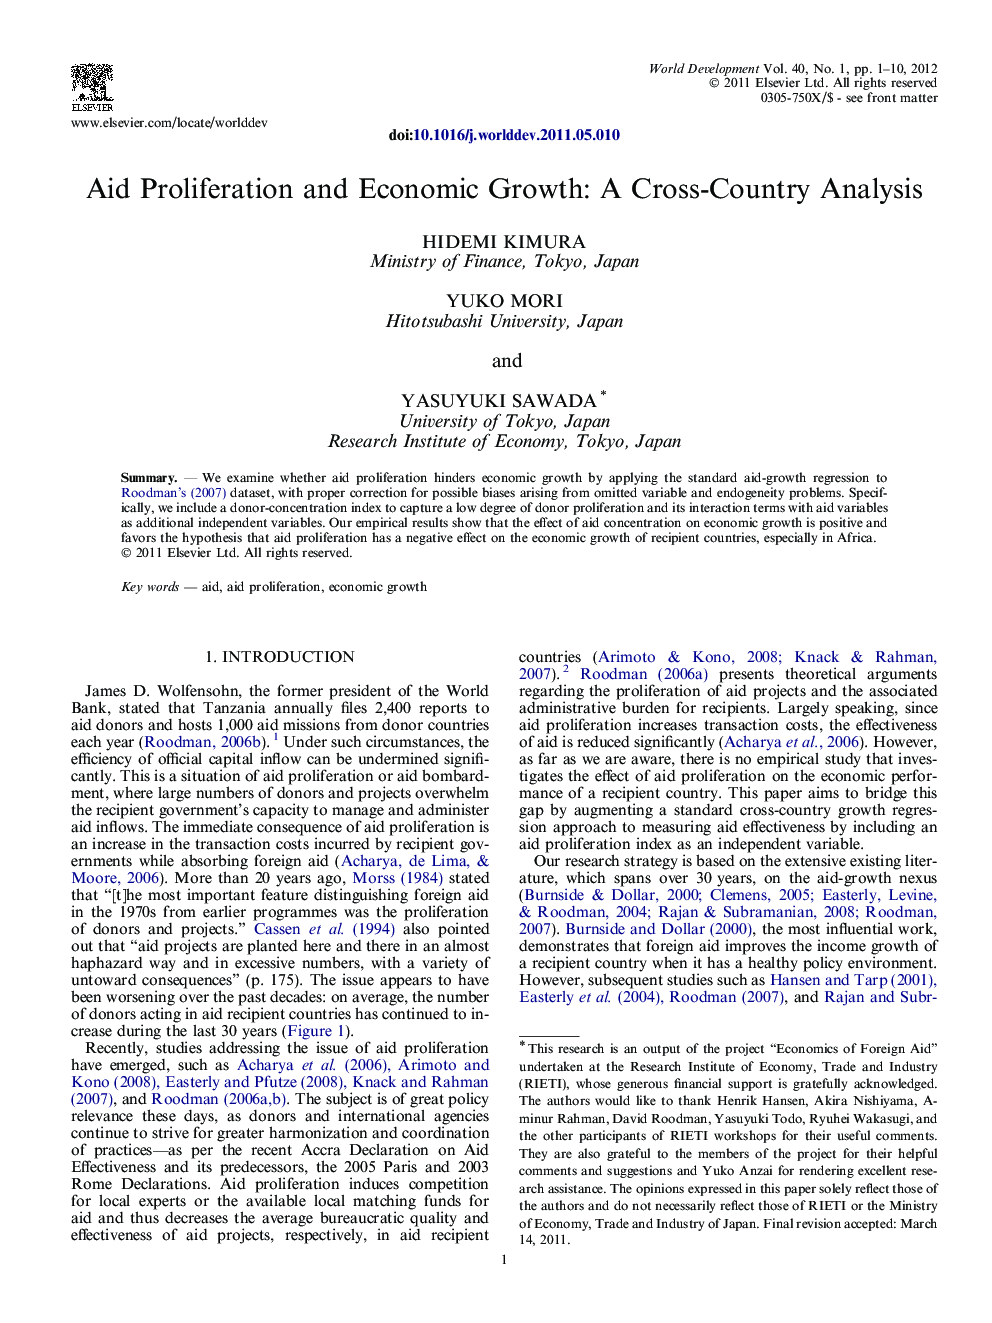 Aid Proliferation and Economic Growth: A Cross-Country Analysis